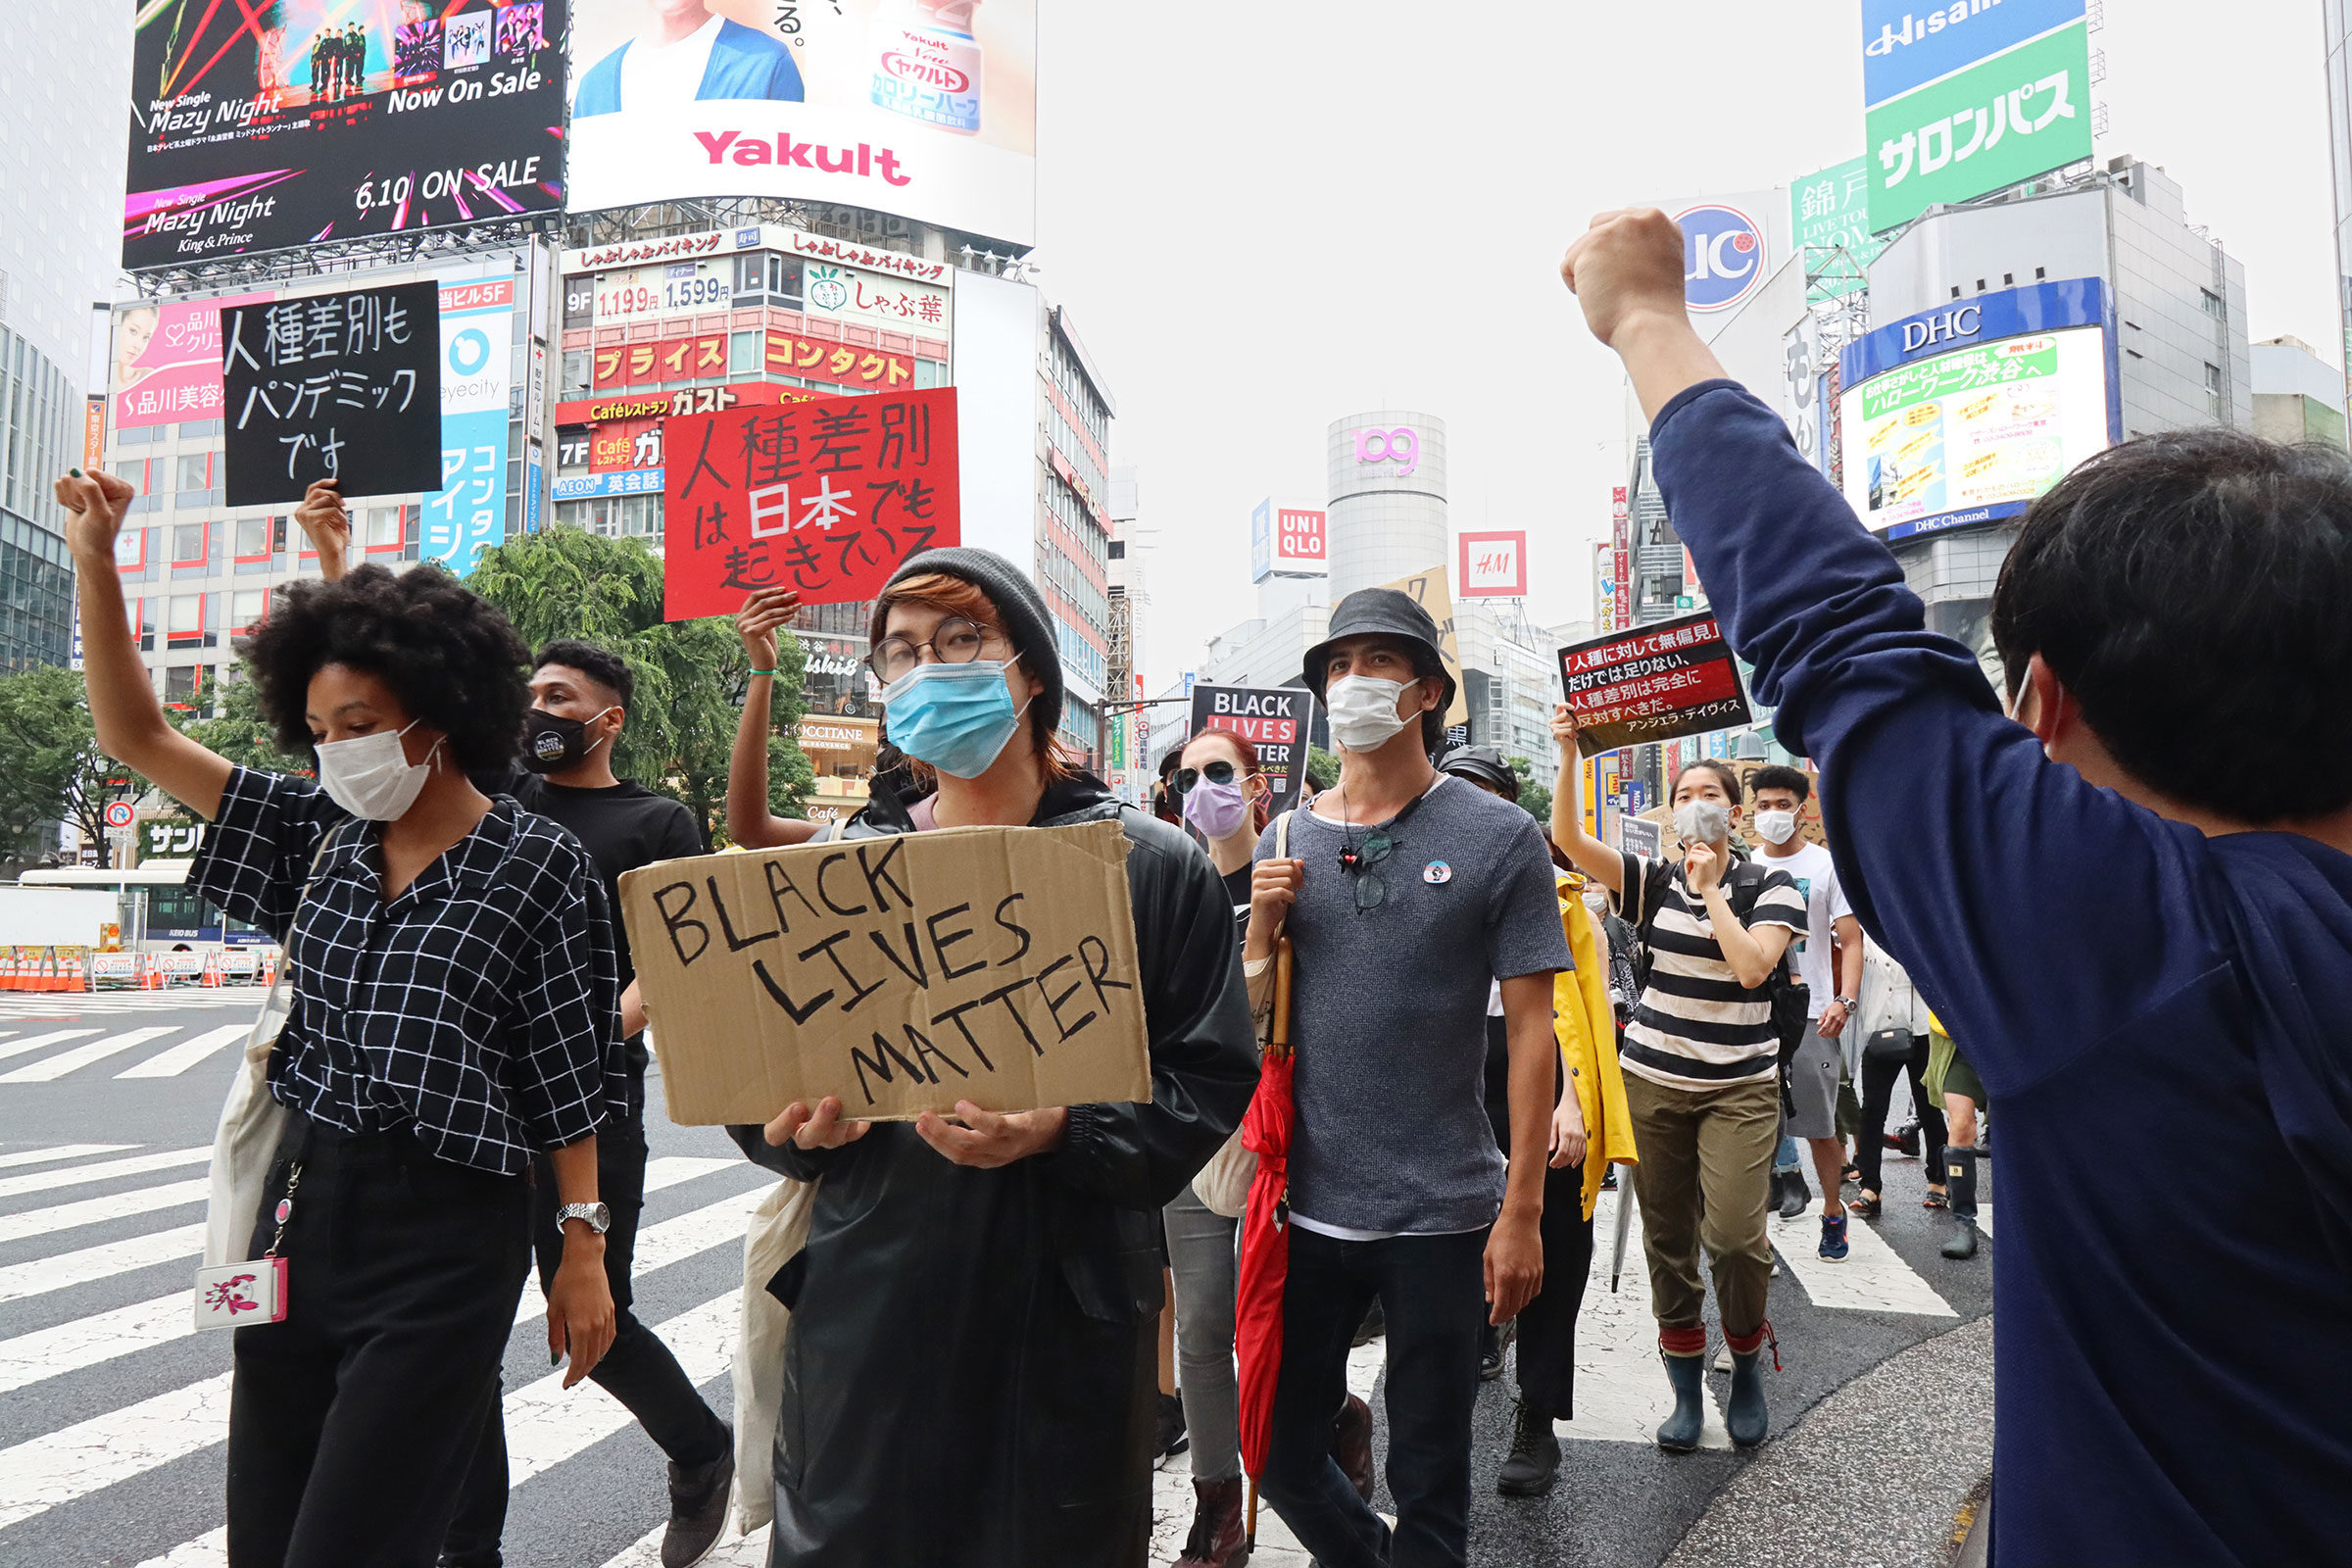 A June 14, 2020 march against racism in Tokyo (Yoshio Tsunoda—AFLO/Getty Images)